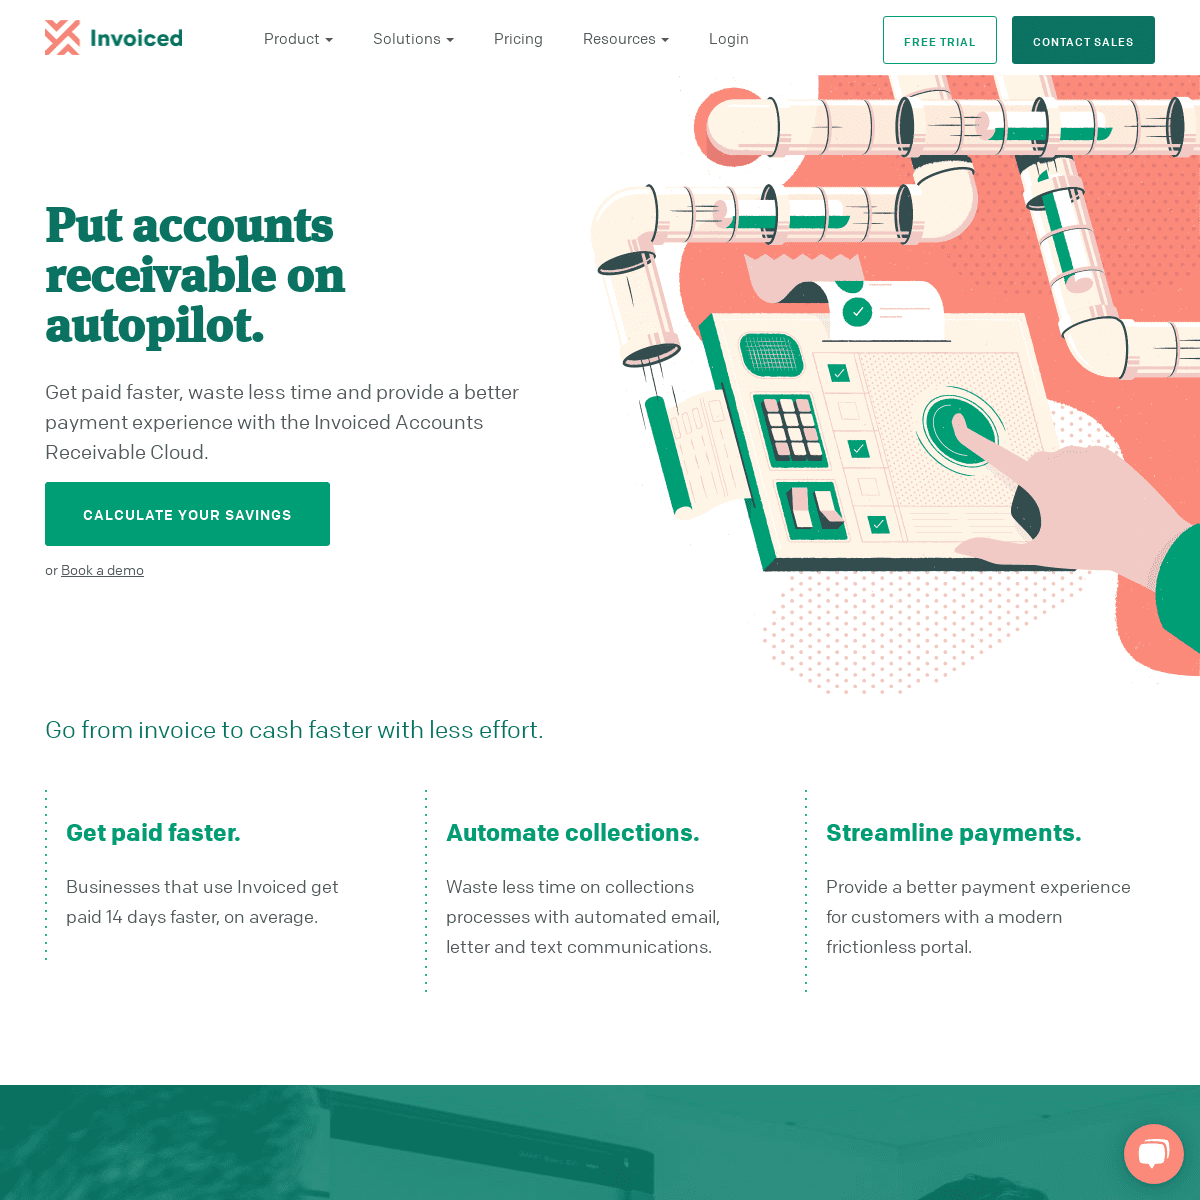 A complete backup of https://invoiced.com